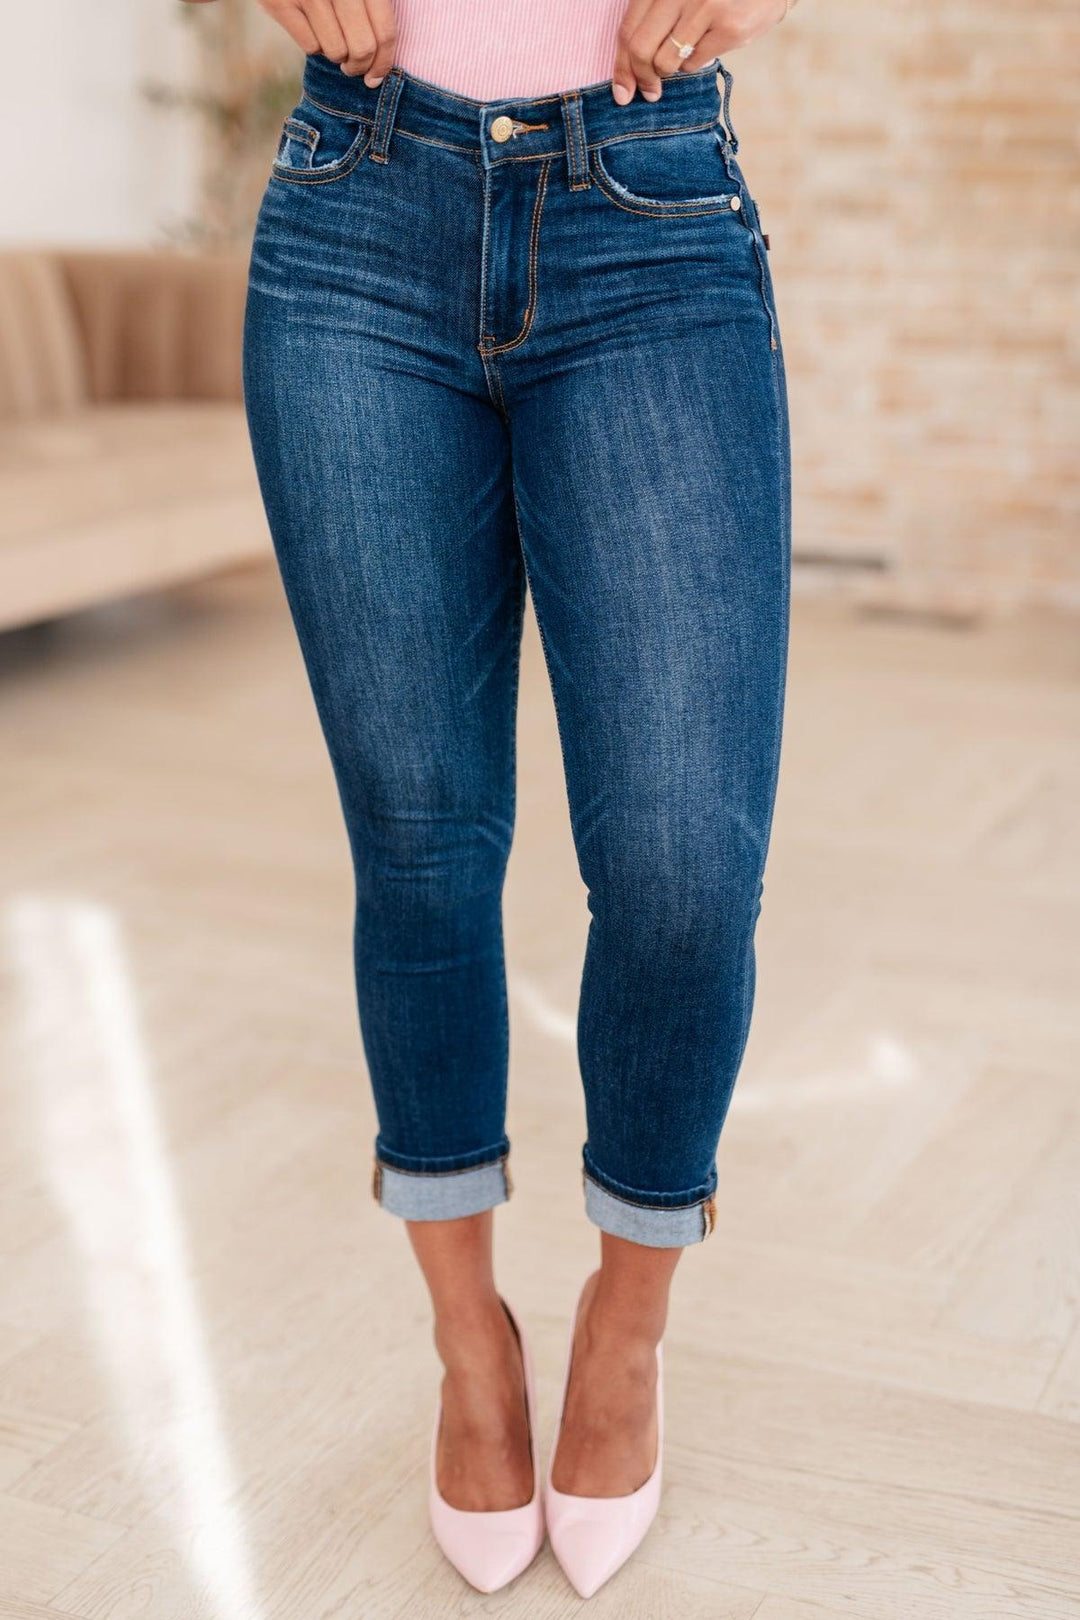 Skinny Jeans – Inspired Eye Boutique